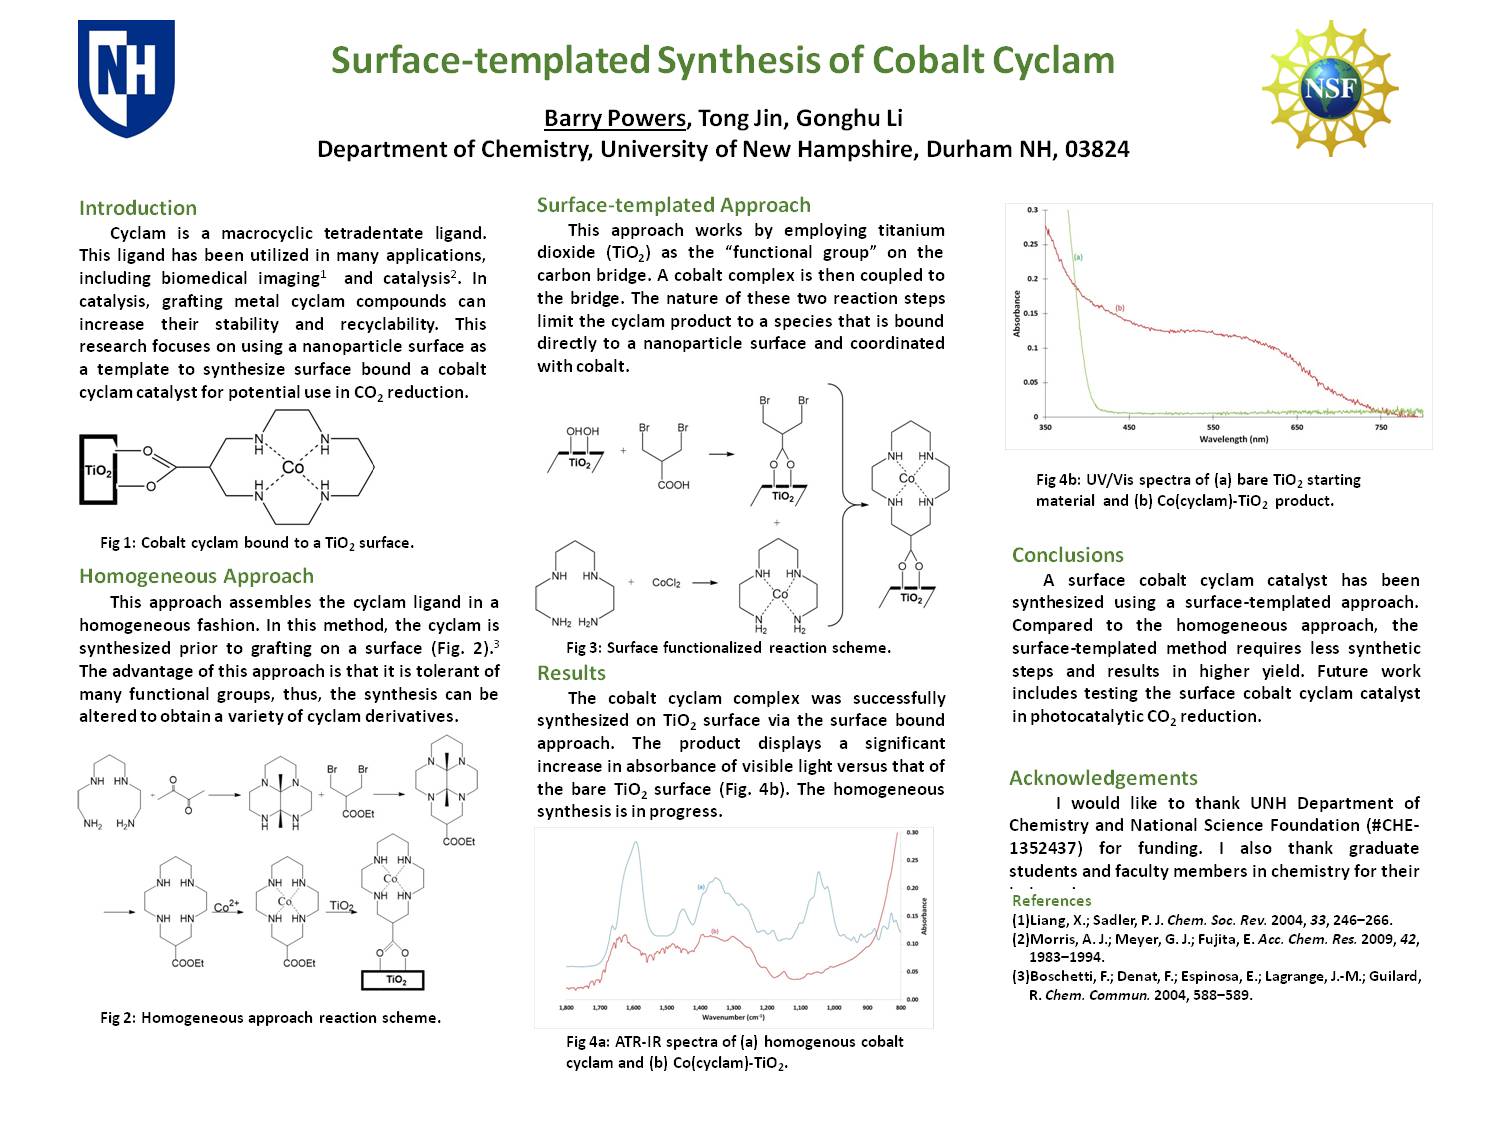 Surface-Templated Synthesis Of Cobalt Cyclam by bwy24